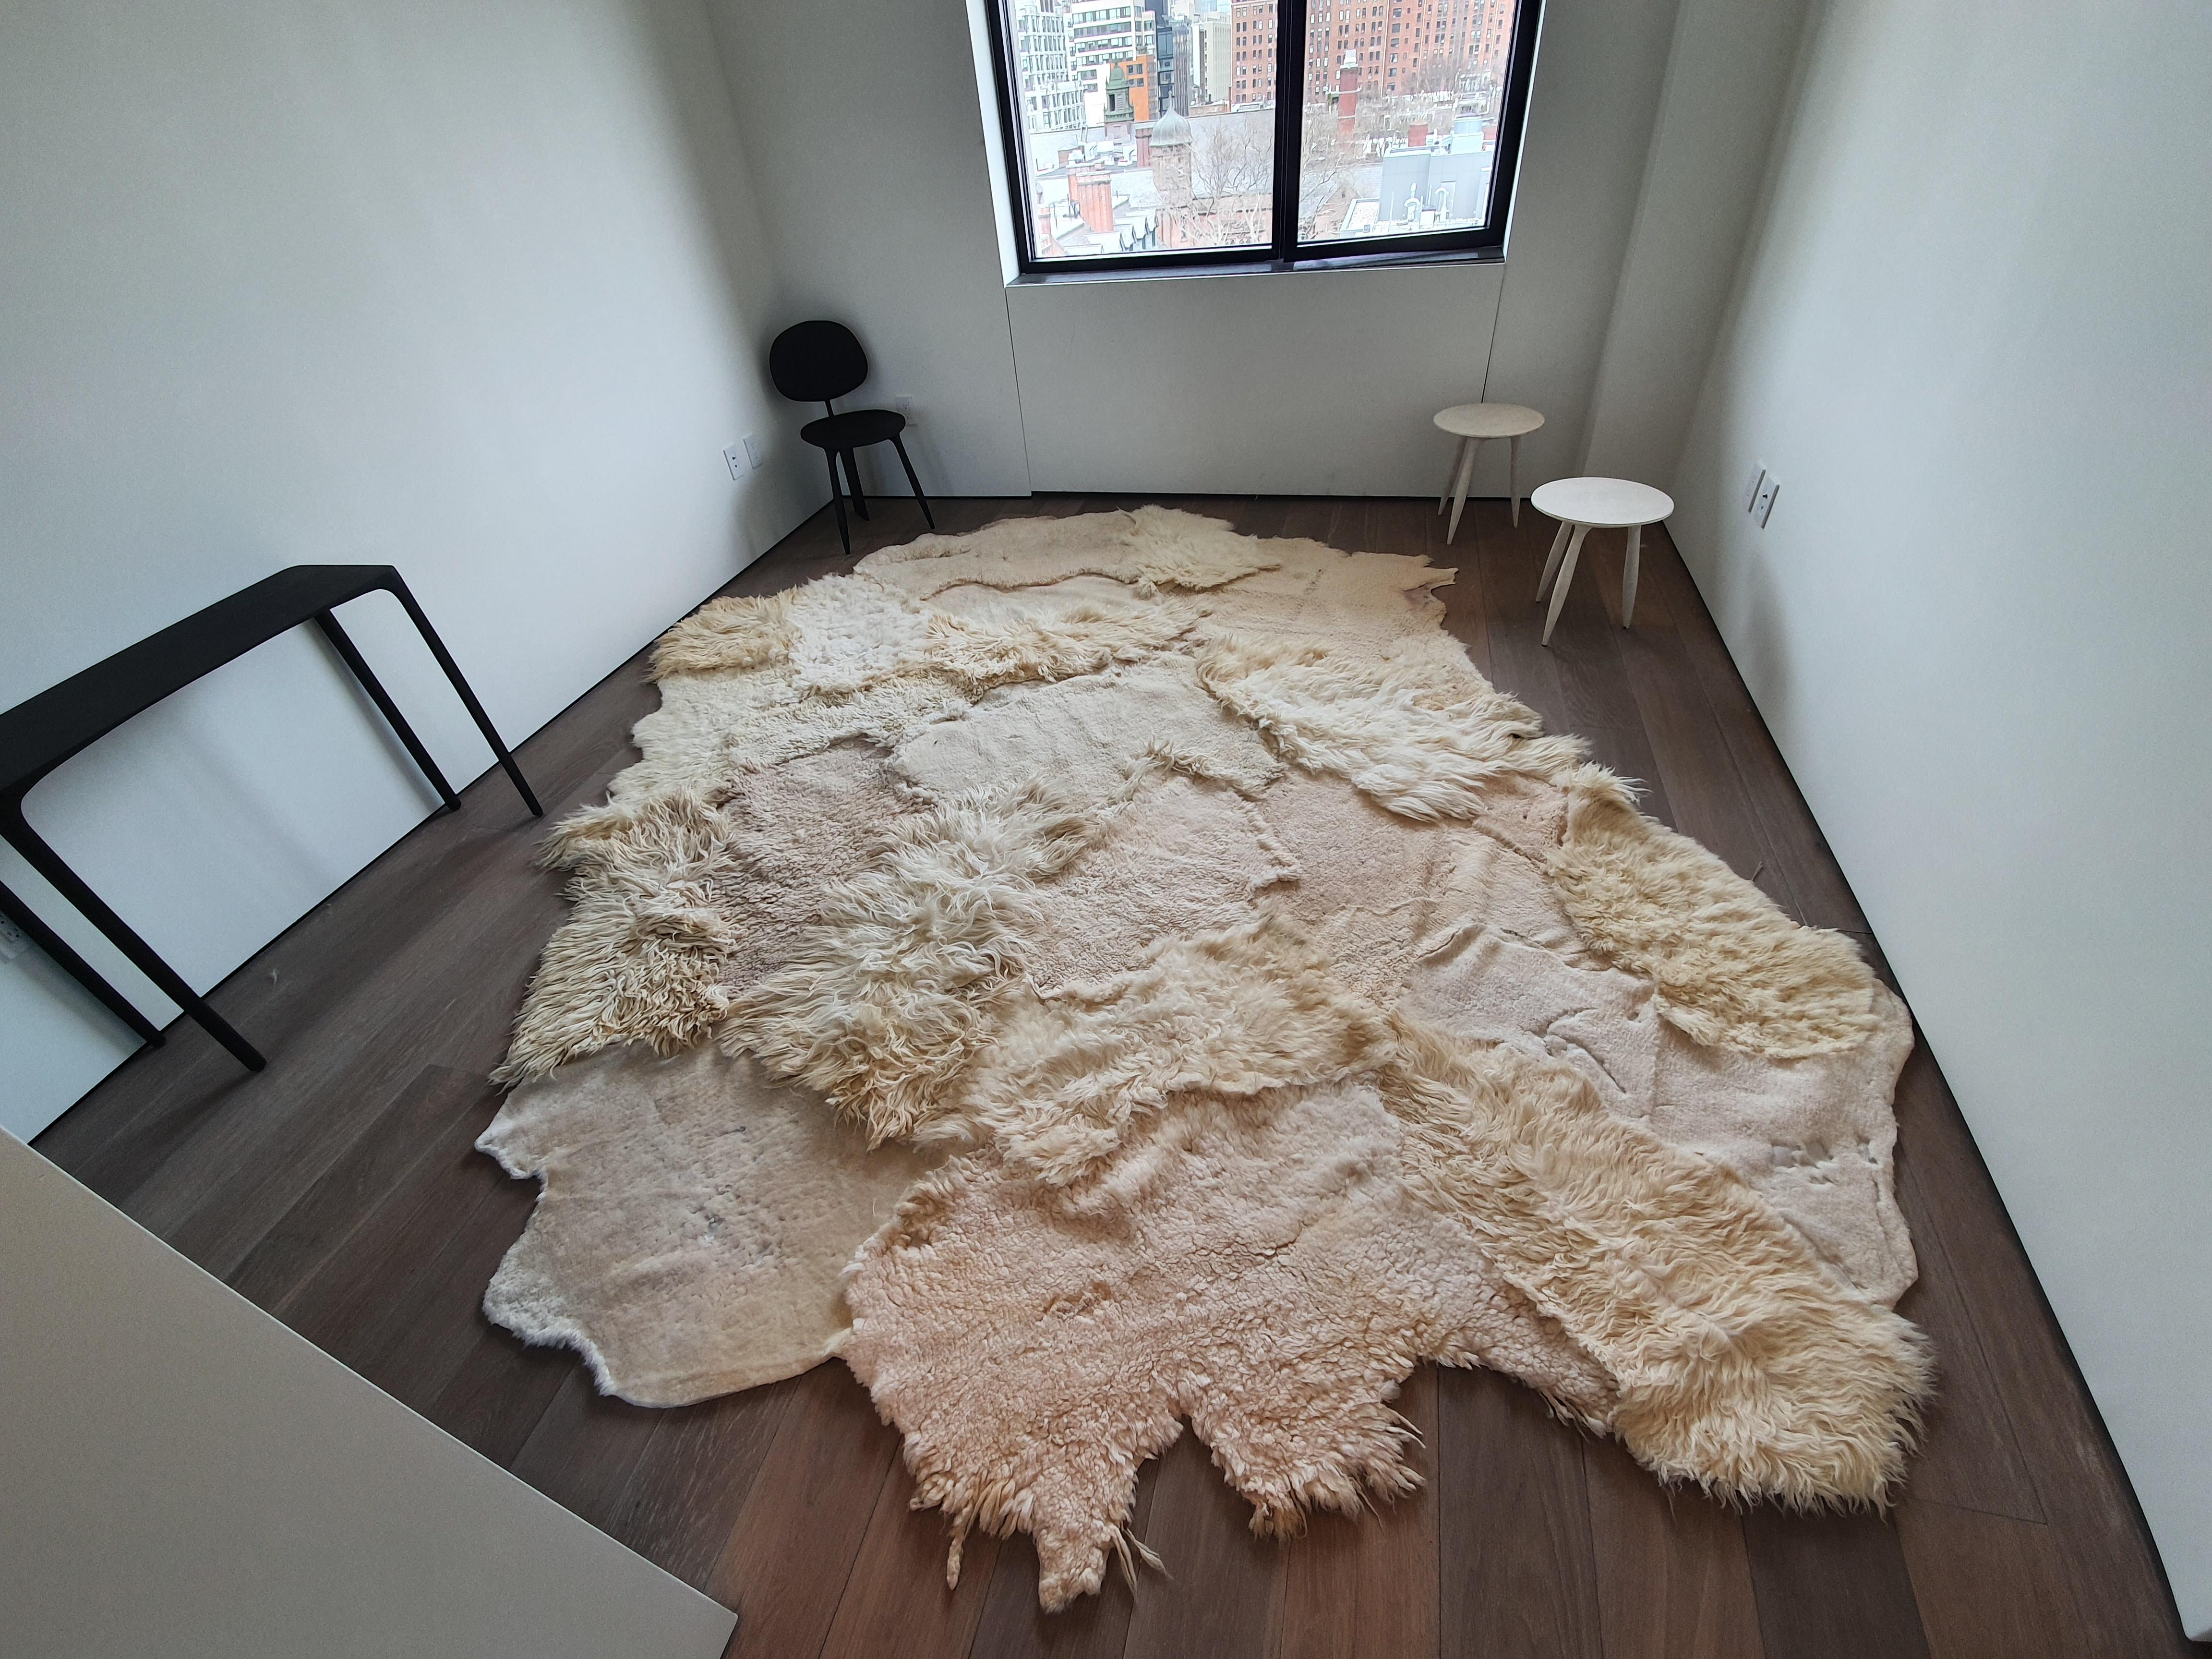 Artistic rug by Carine Boxy
Dimensions: 390 x 300 cm
Materials: Naturally dyed sheepskin

Each rug is different and unique, please contact us for made to order dimensions.
Carine Boxy is internationally known for her artistic sheepskin rugs.